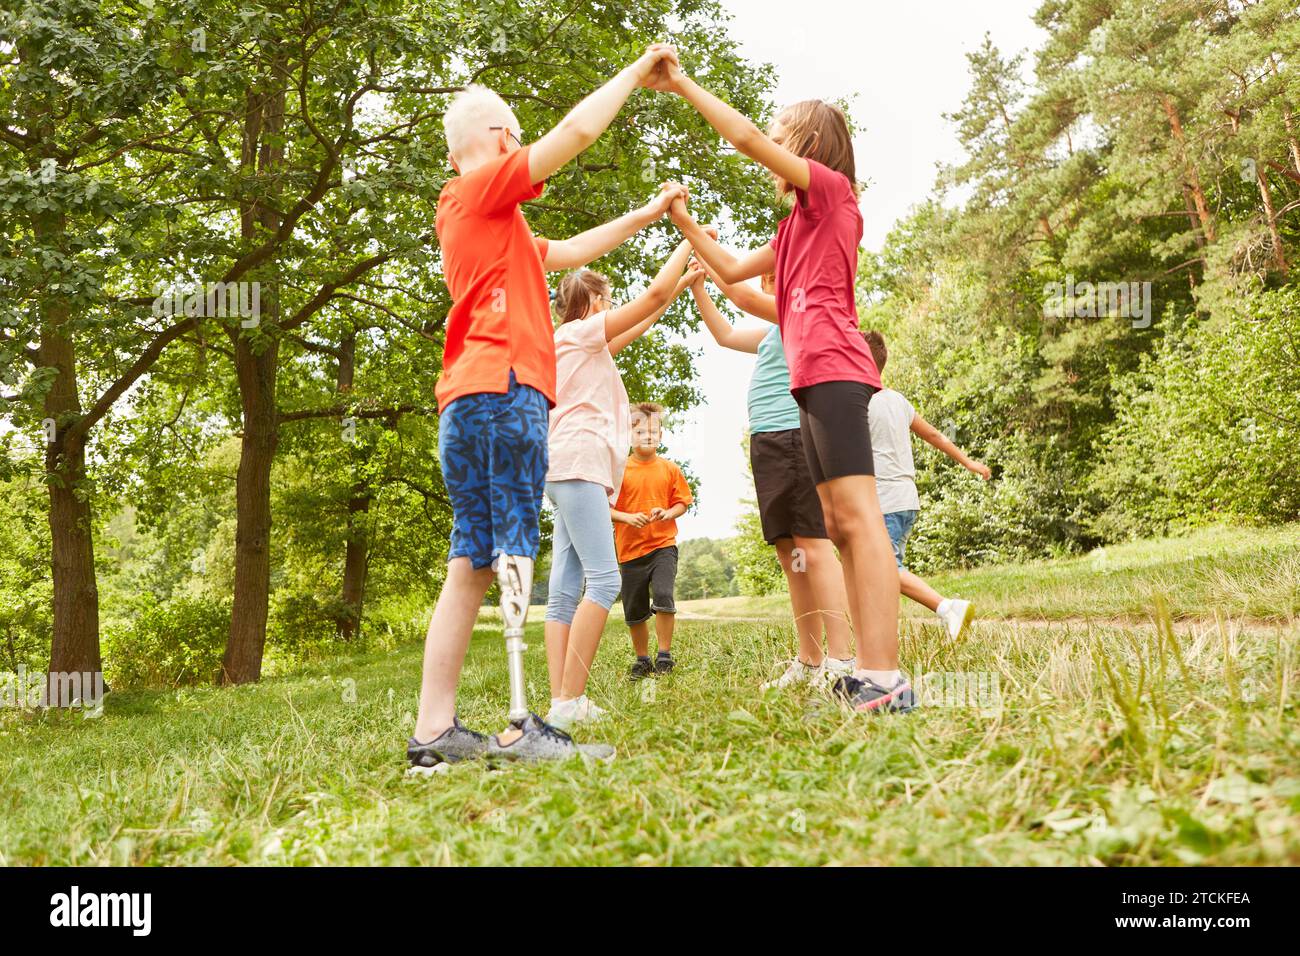 Group of male and female friends playing games while standing at park Stock Photo